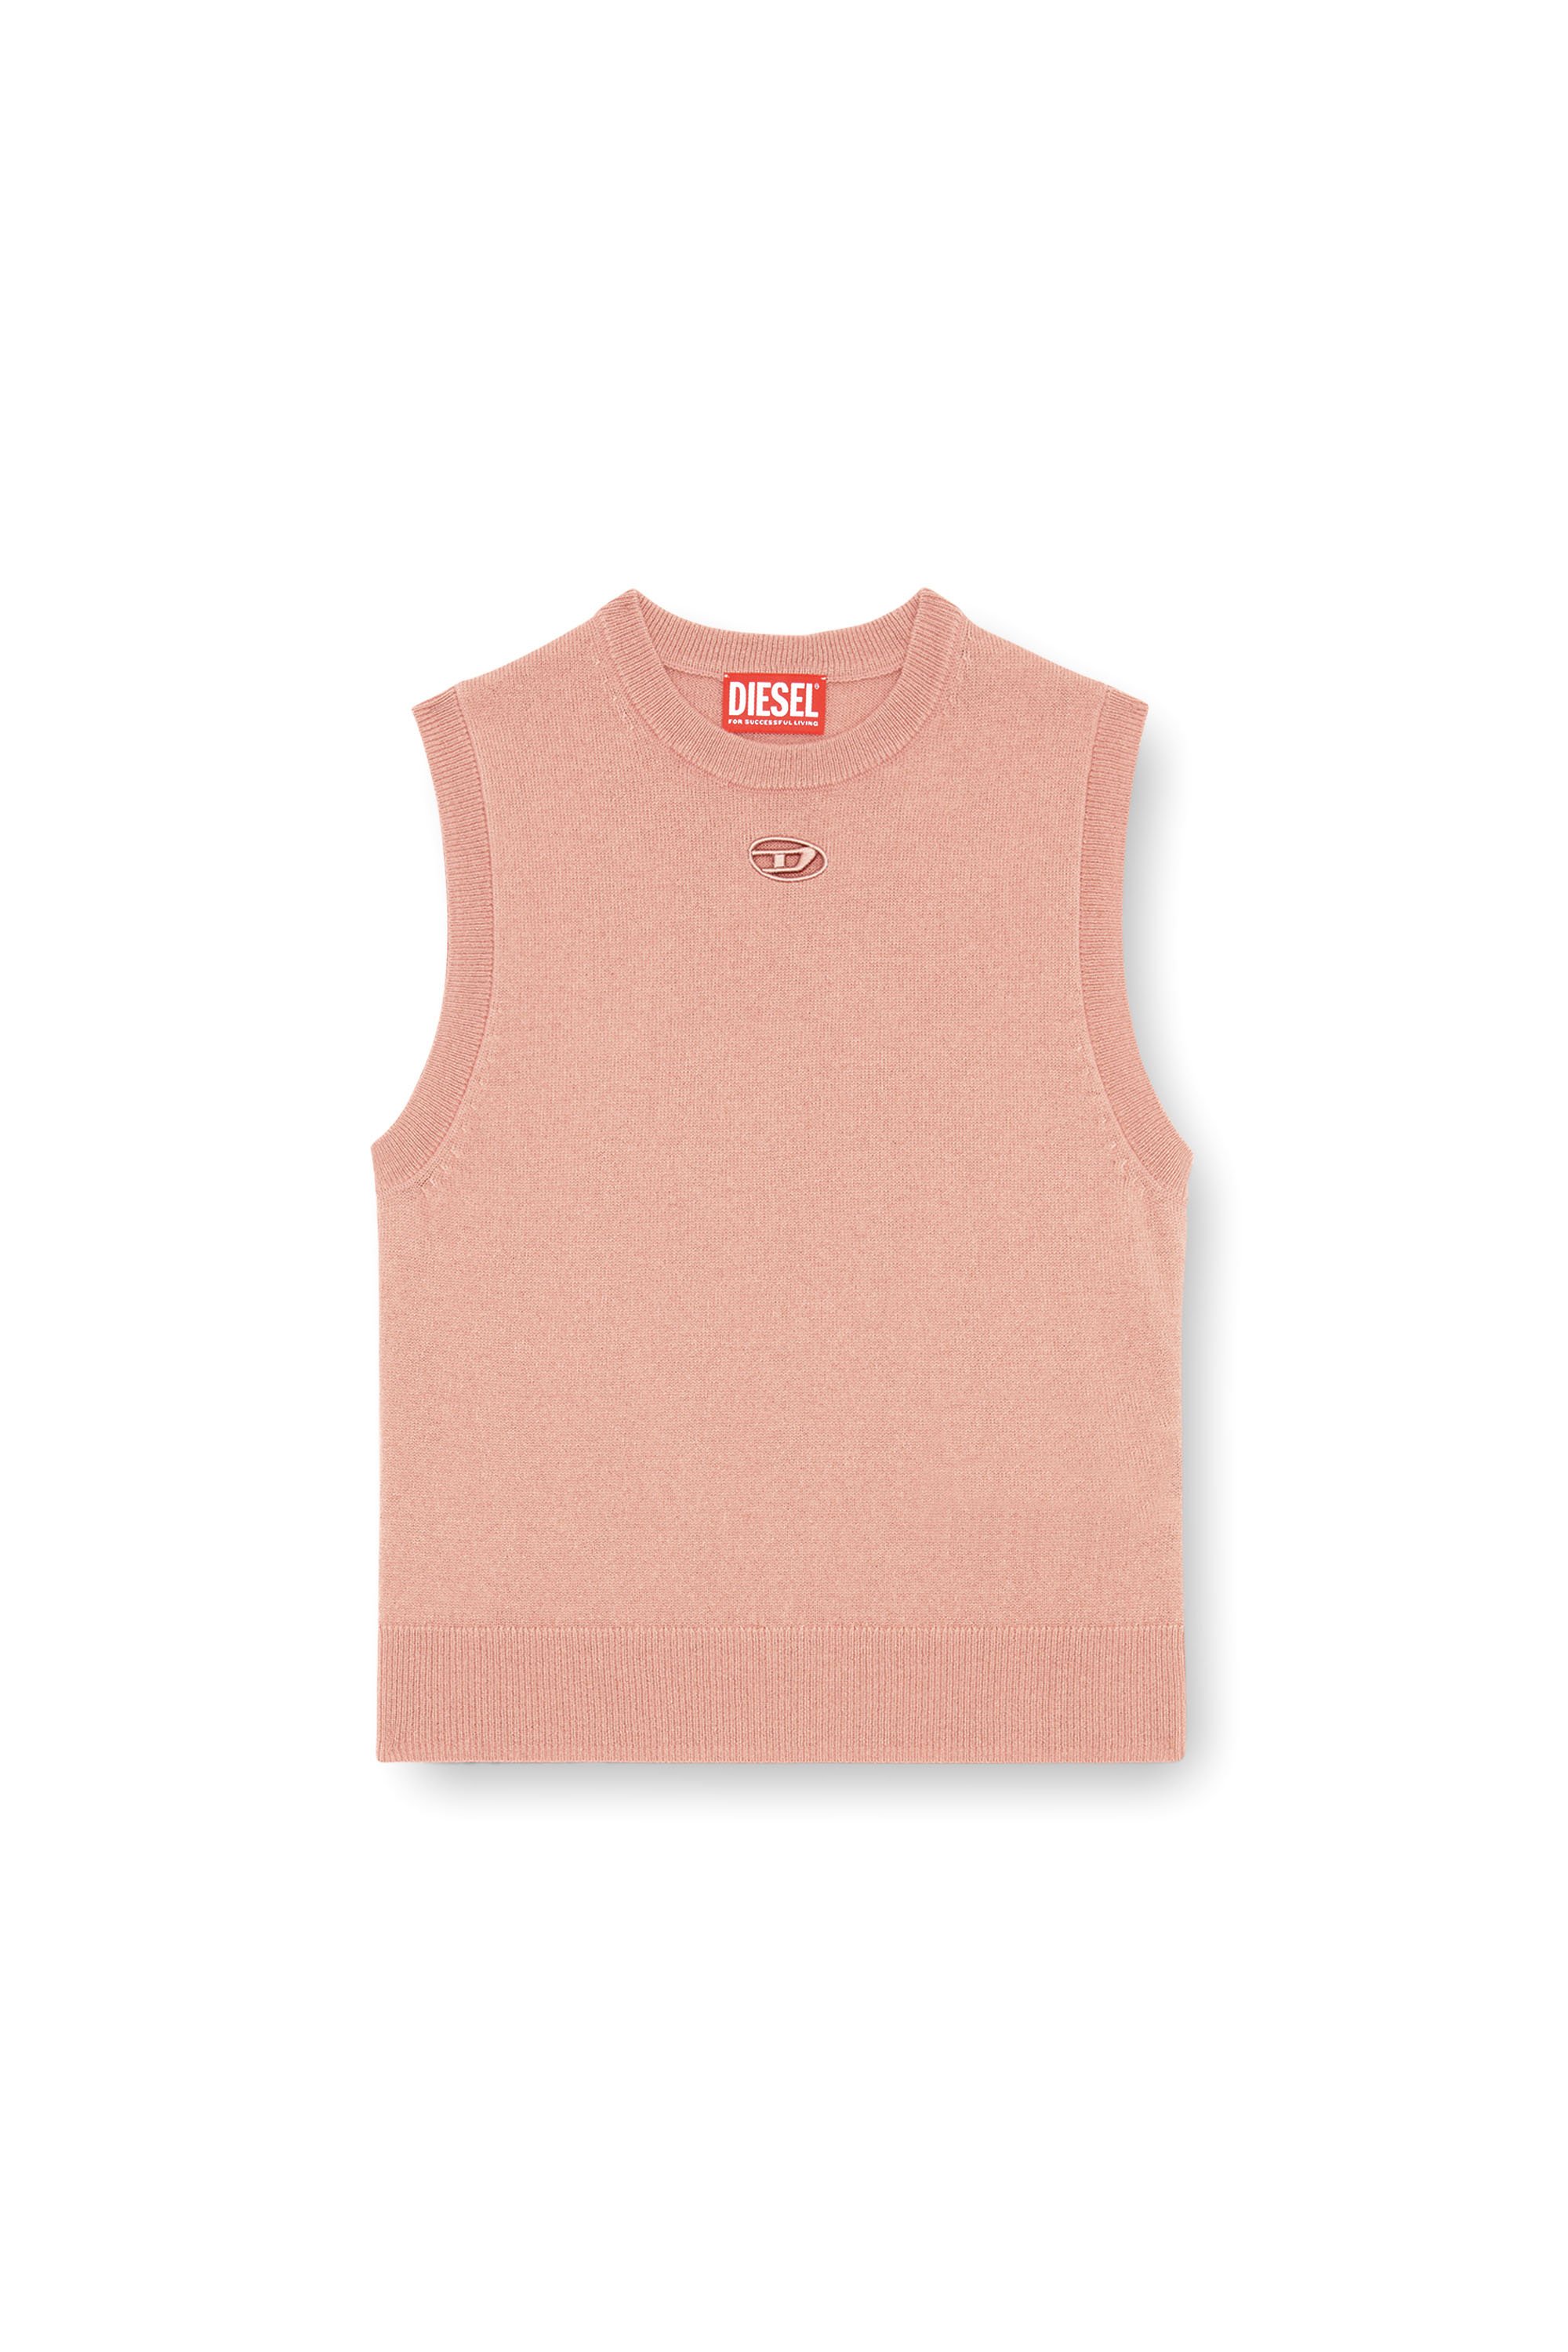 Diesel - M-ARGA-SL, Woman Cropped vest in wool and cashmere knit in Pink - Image 5